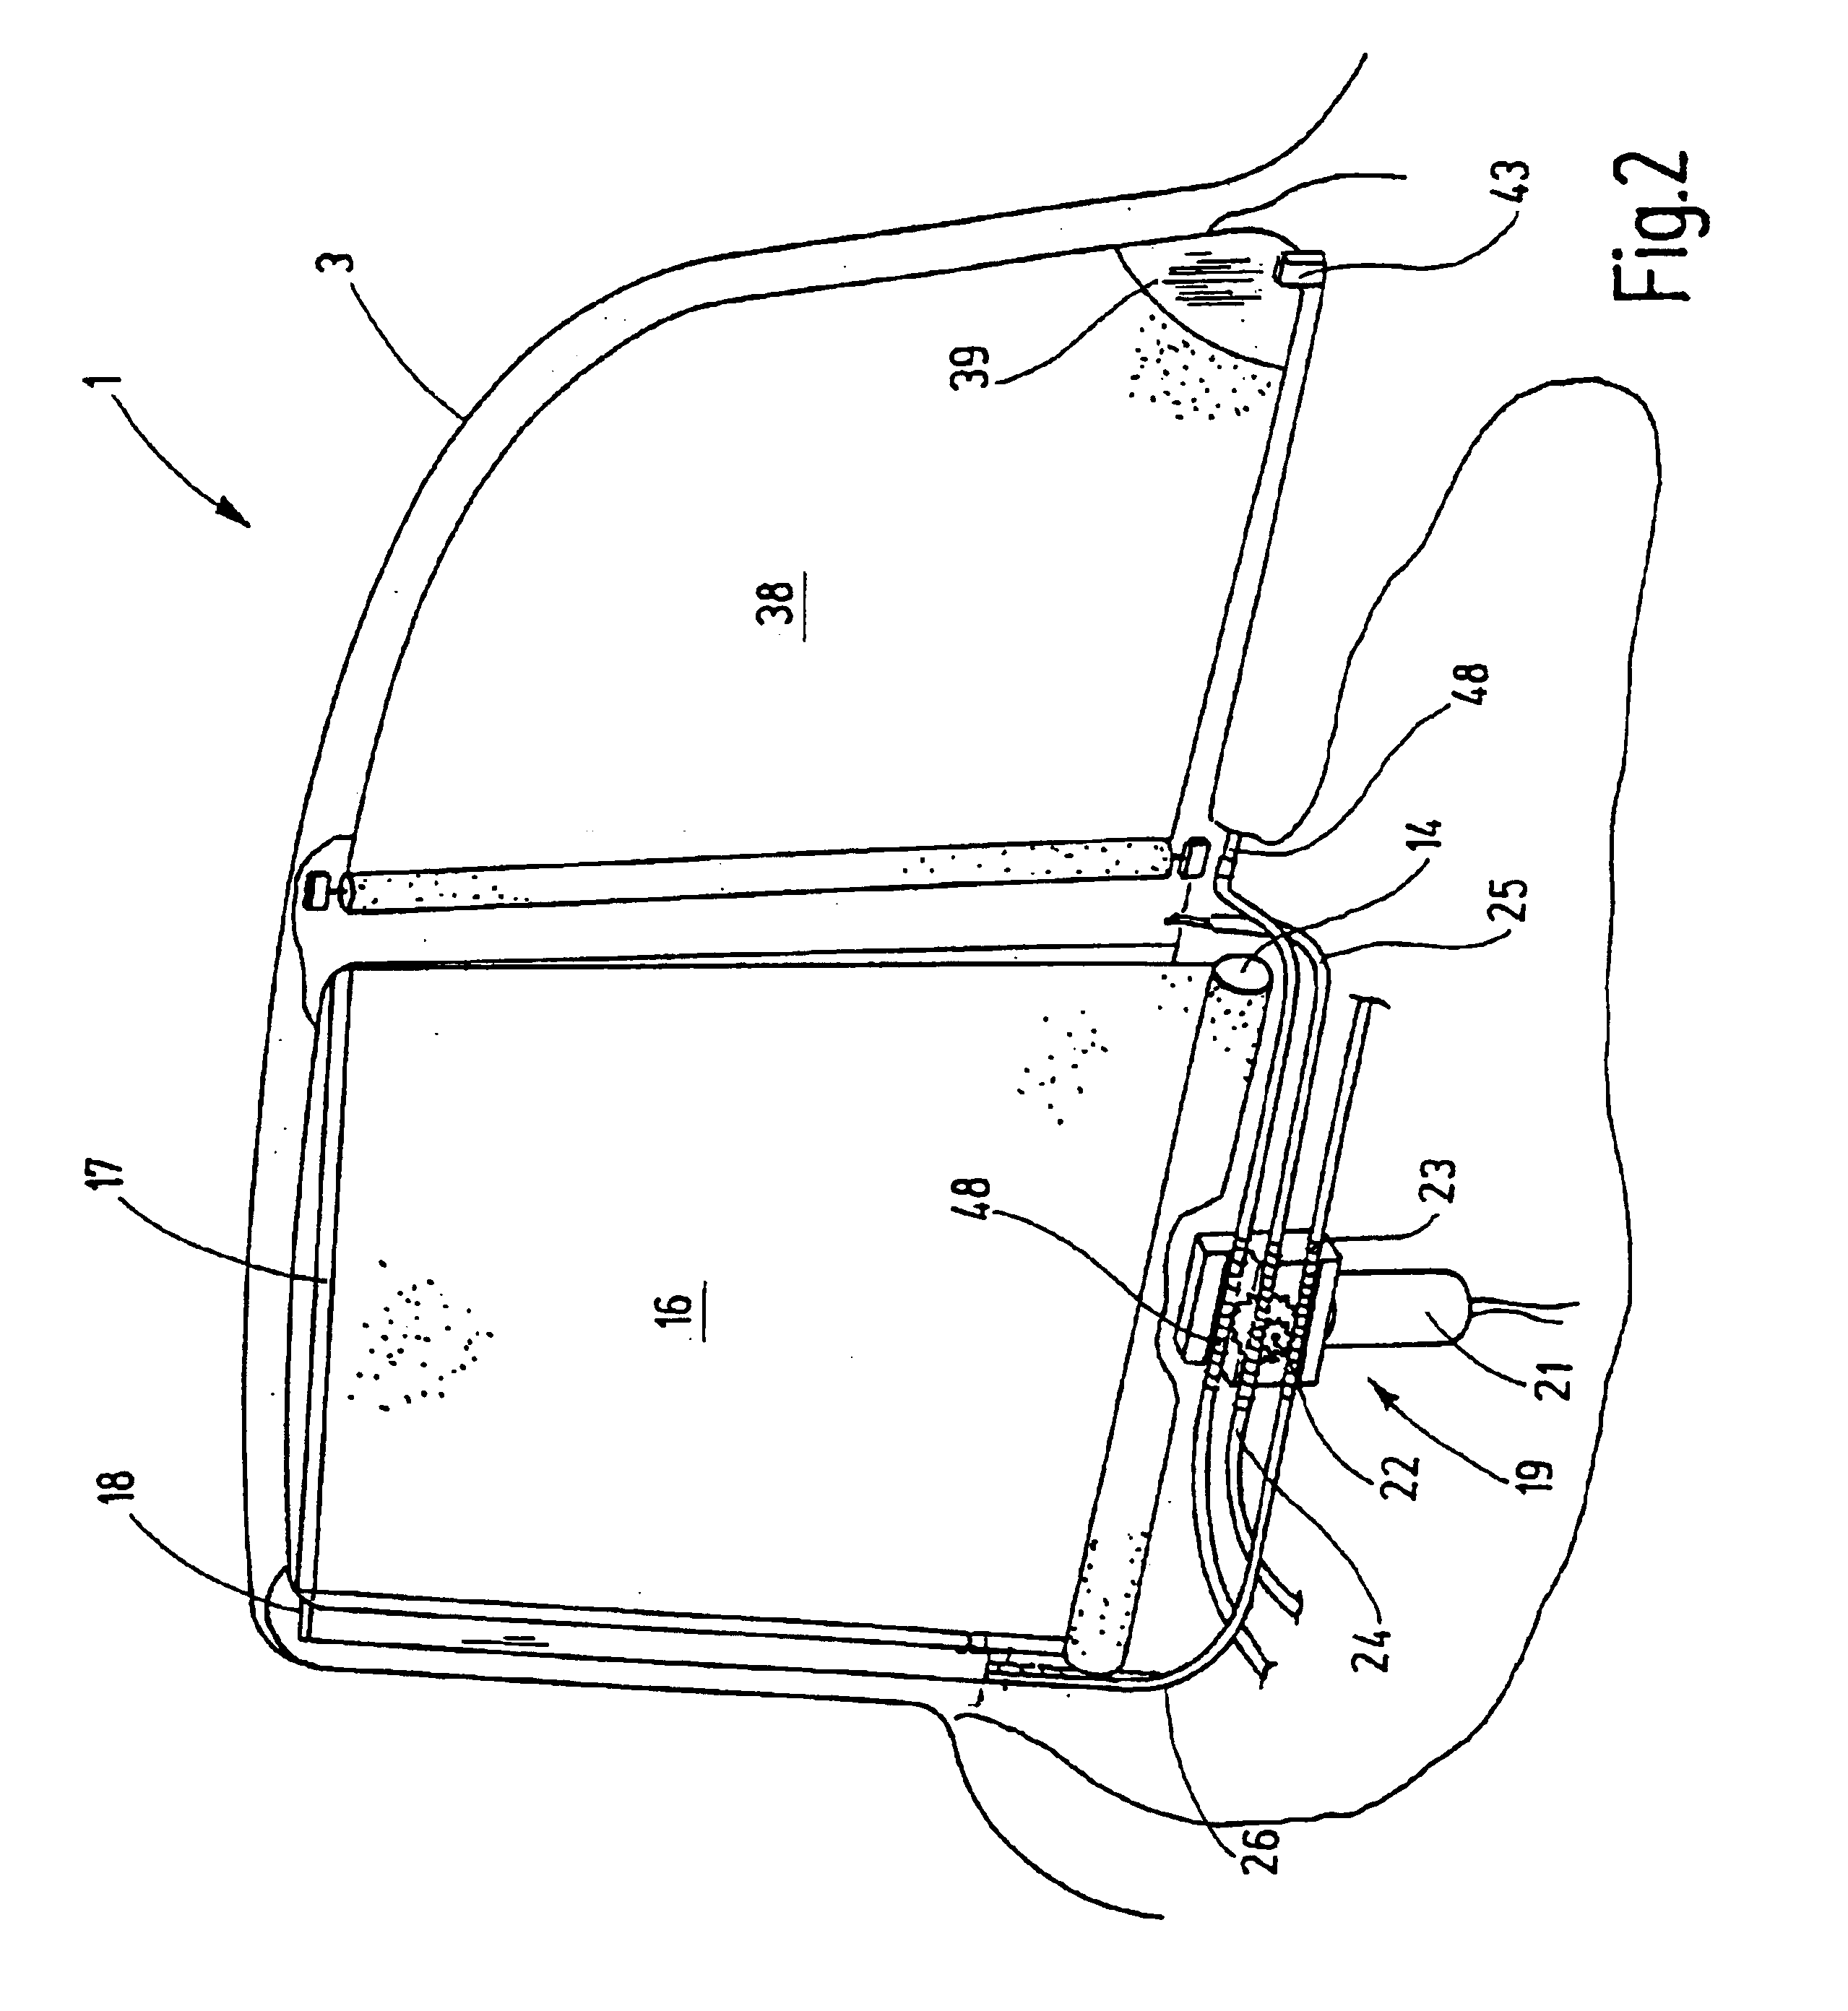 Divided window shade arrangement for motor vehicles